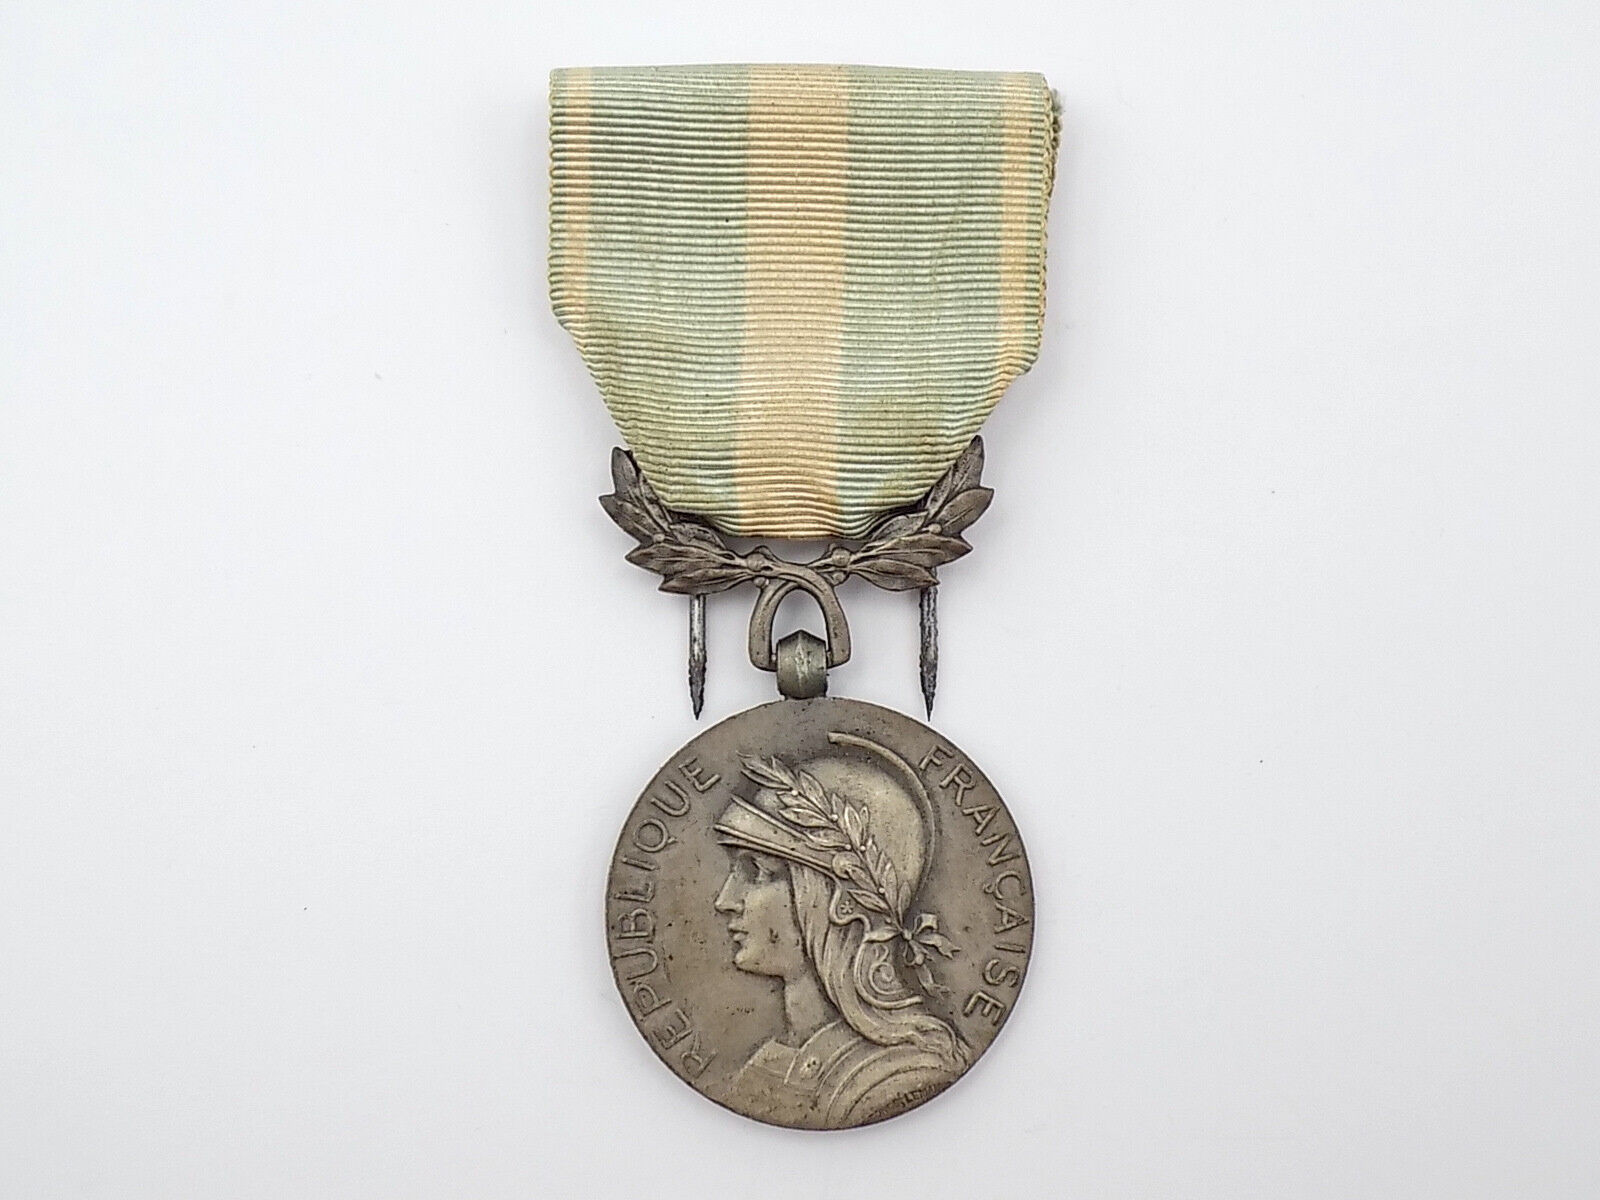 Original French Colonial Medal 2nd Official Type Silver